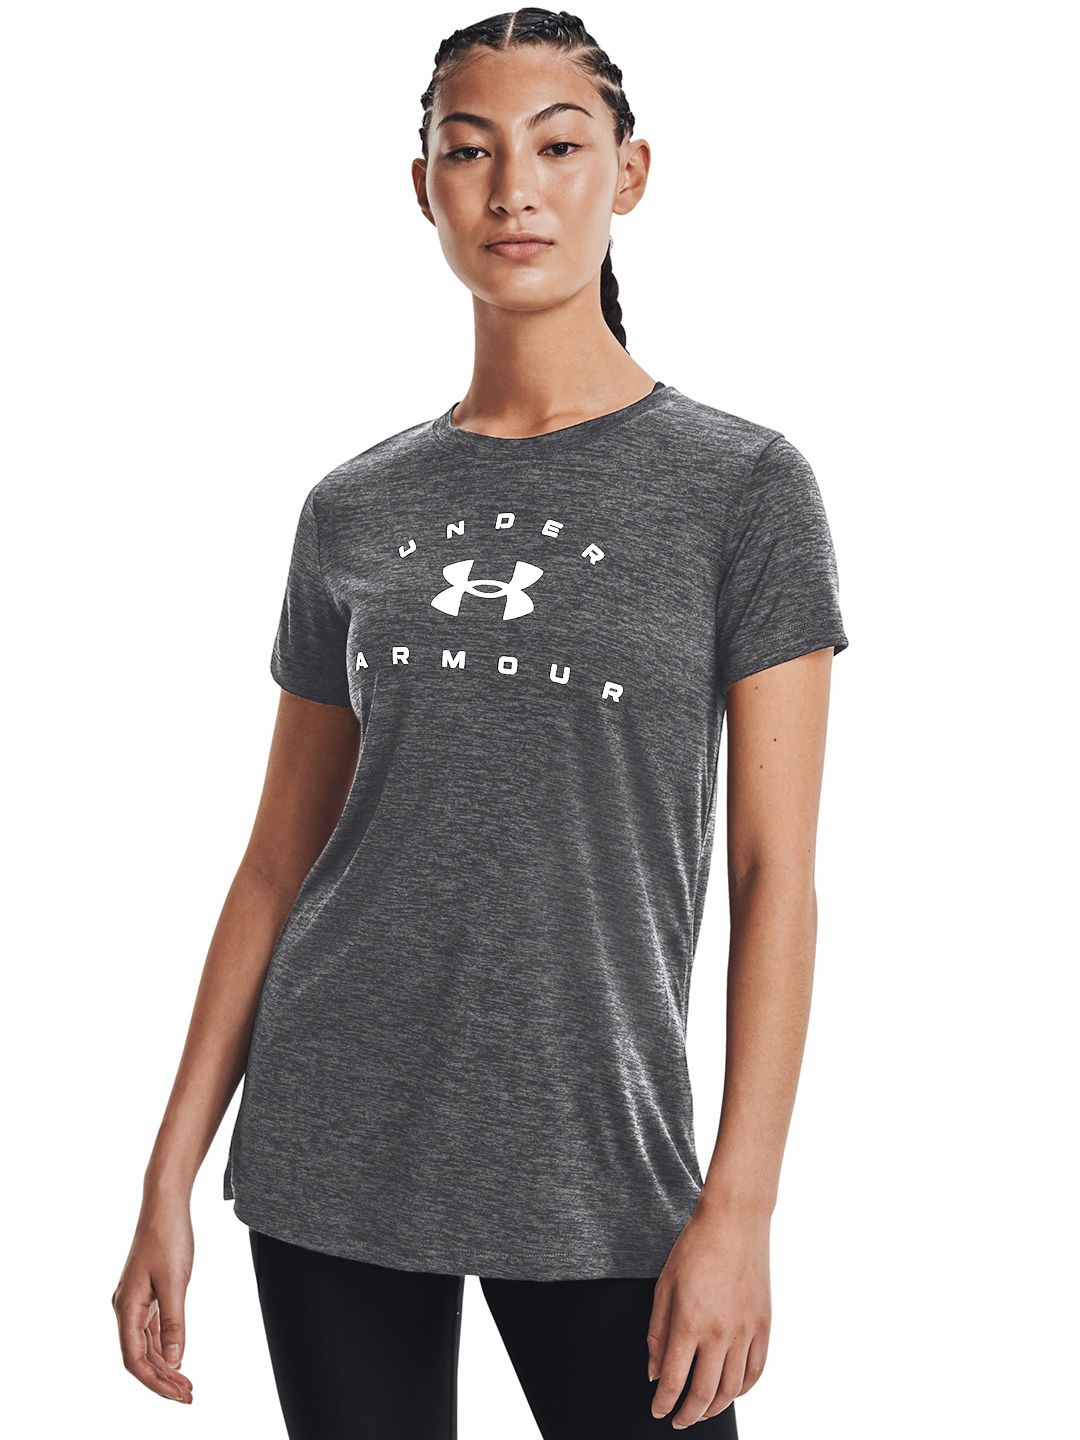 UNDER ARMOUR Women Charcoal Brand Logo Printed Tech Twist Arch SSC T-shirt Price in India